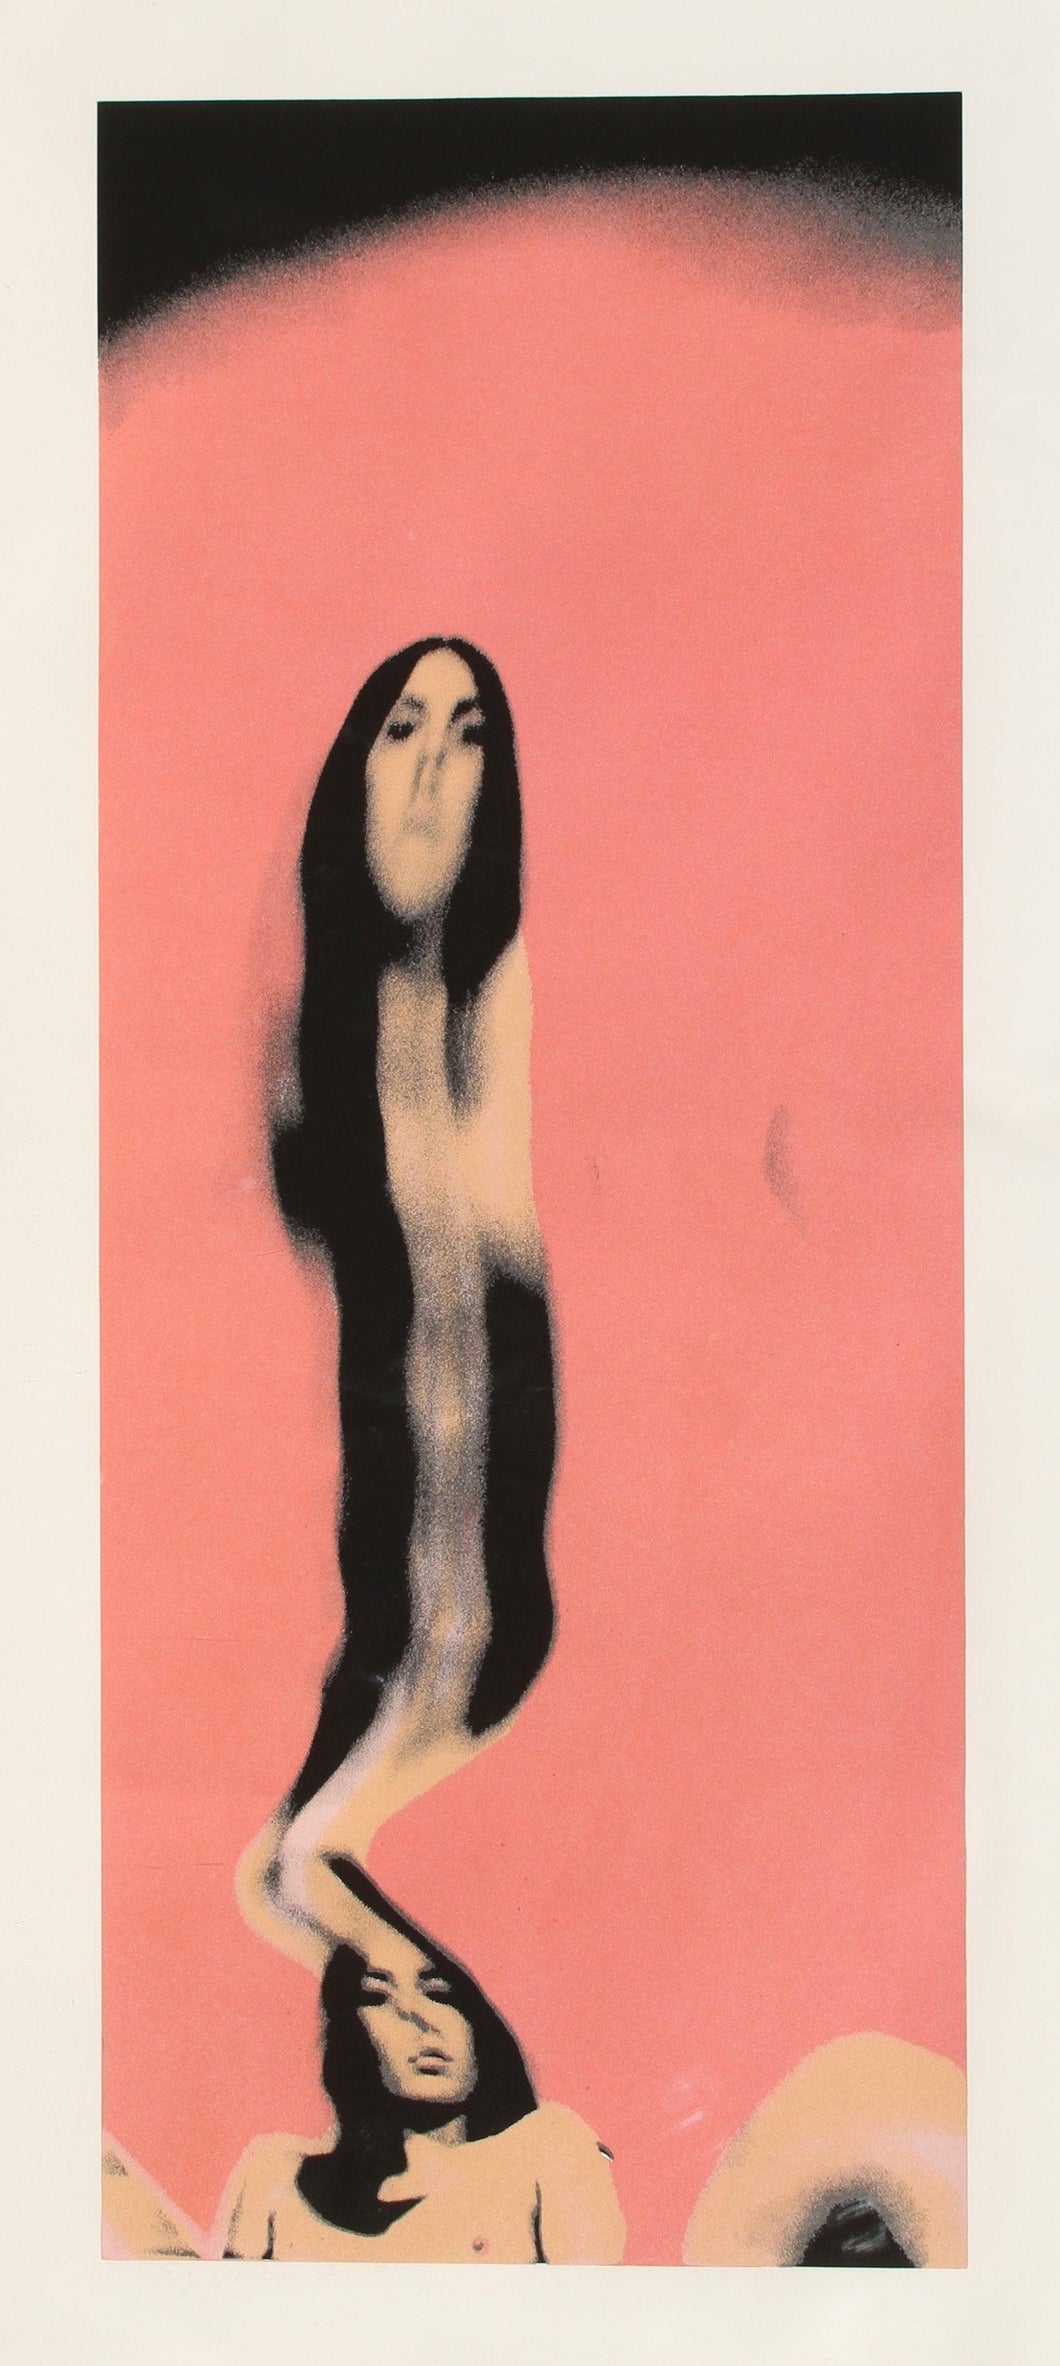 Nude 2 Screenprint | Larry Bell,{{product.type}}